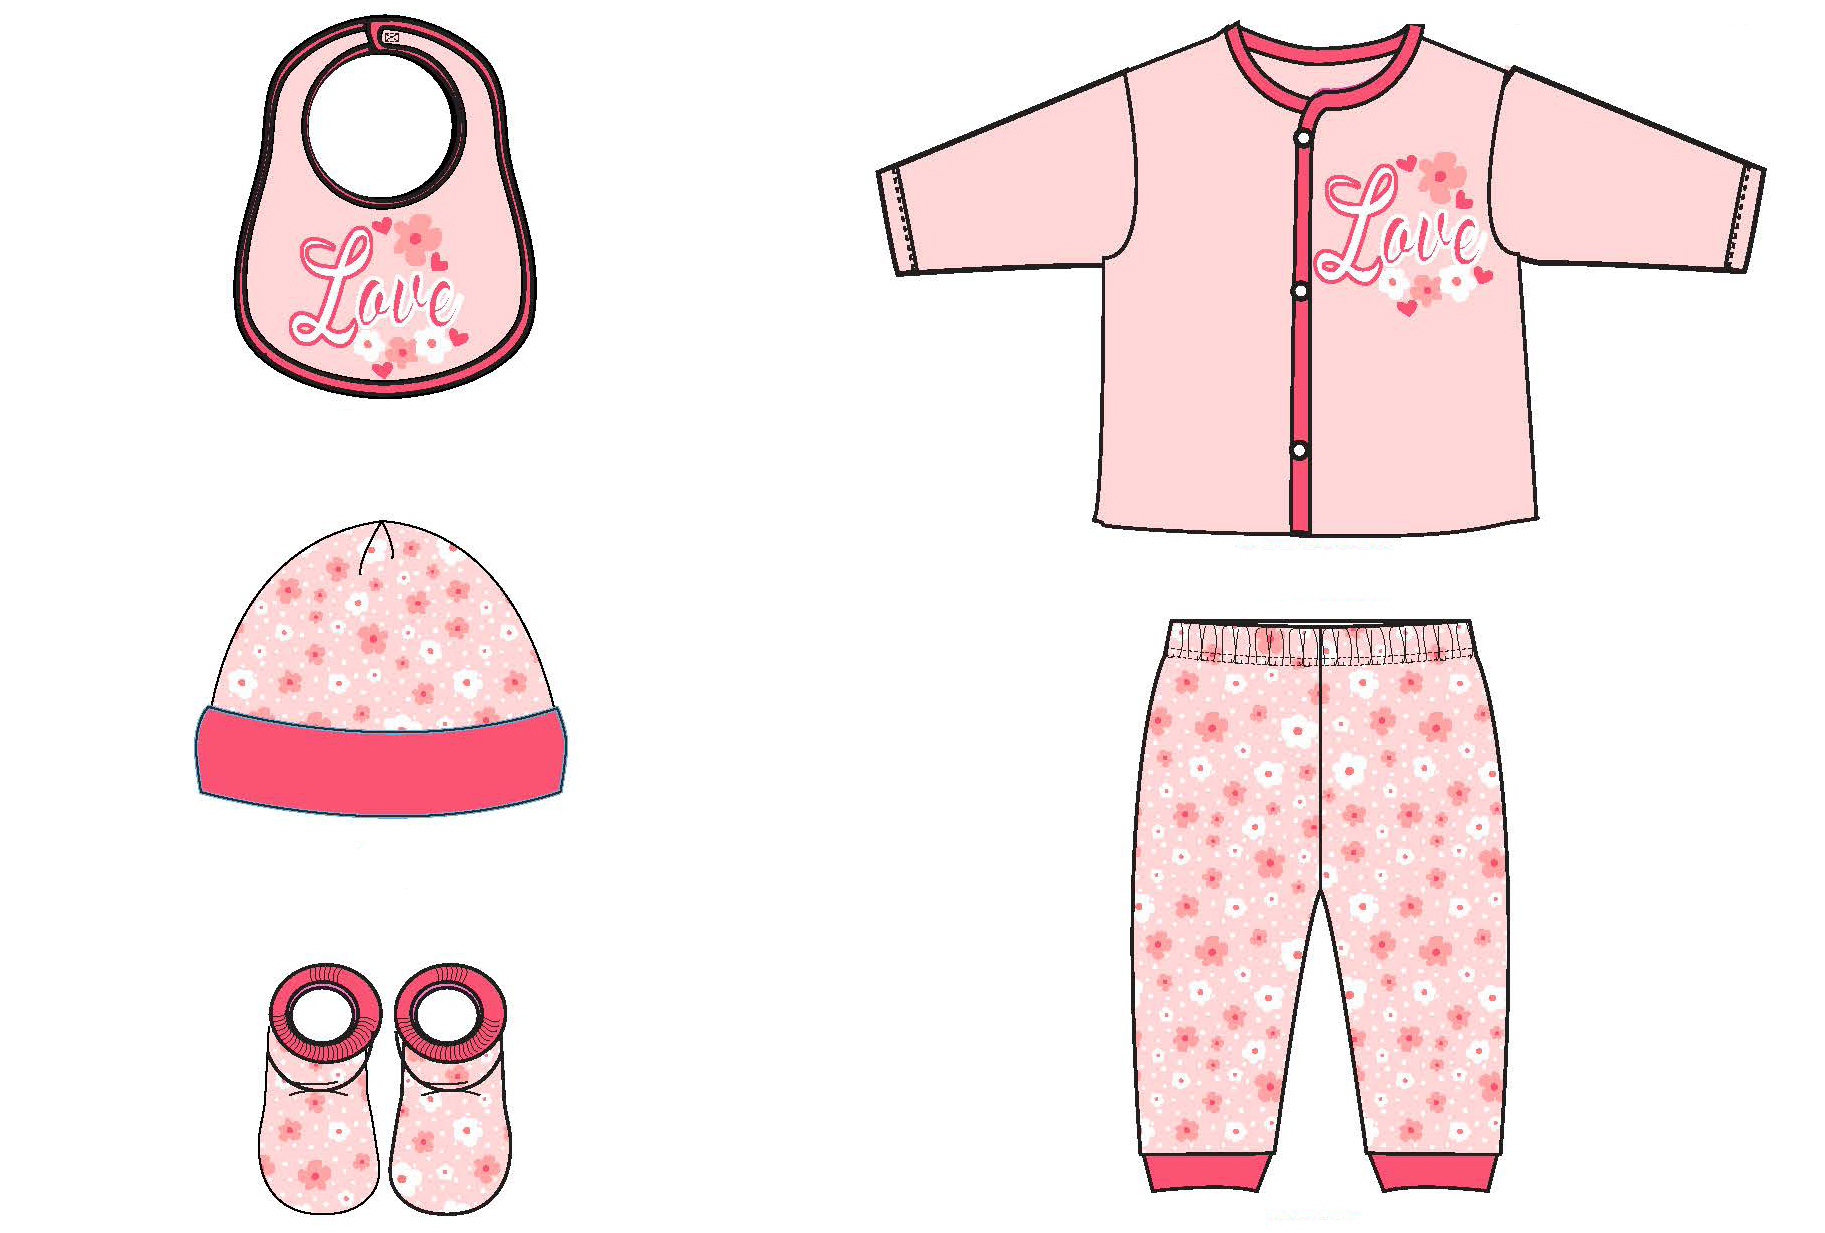 5 PC. Baby Girl's Printed Cardigan & Apparel Sets w/ Floral Love Print